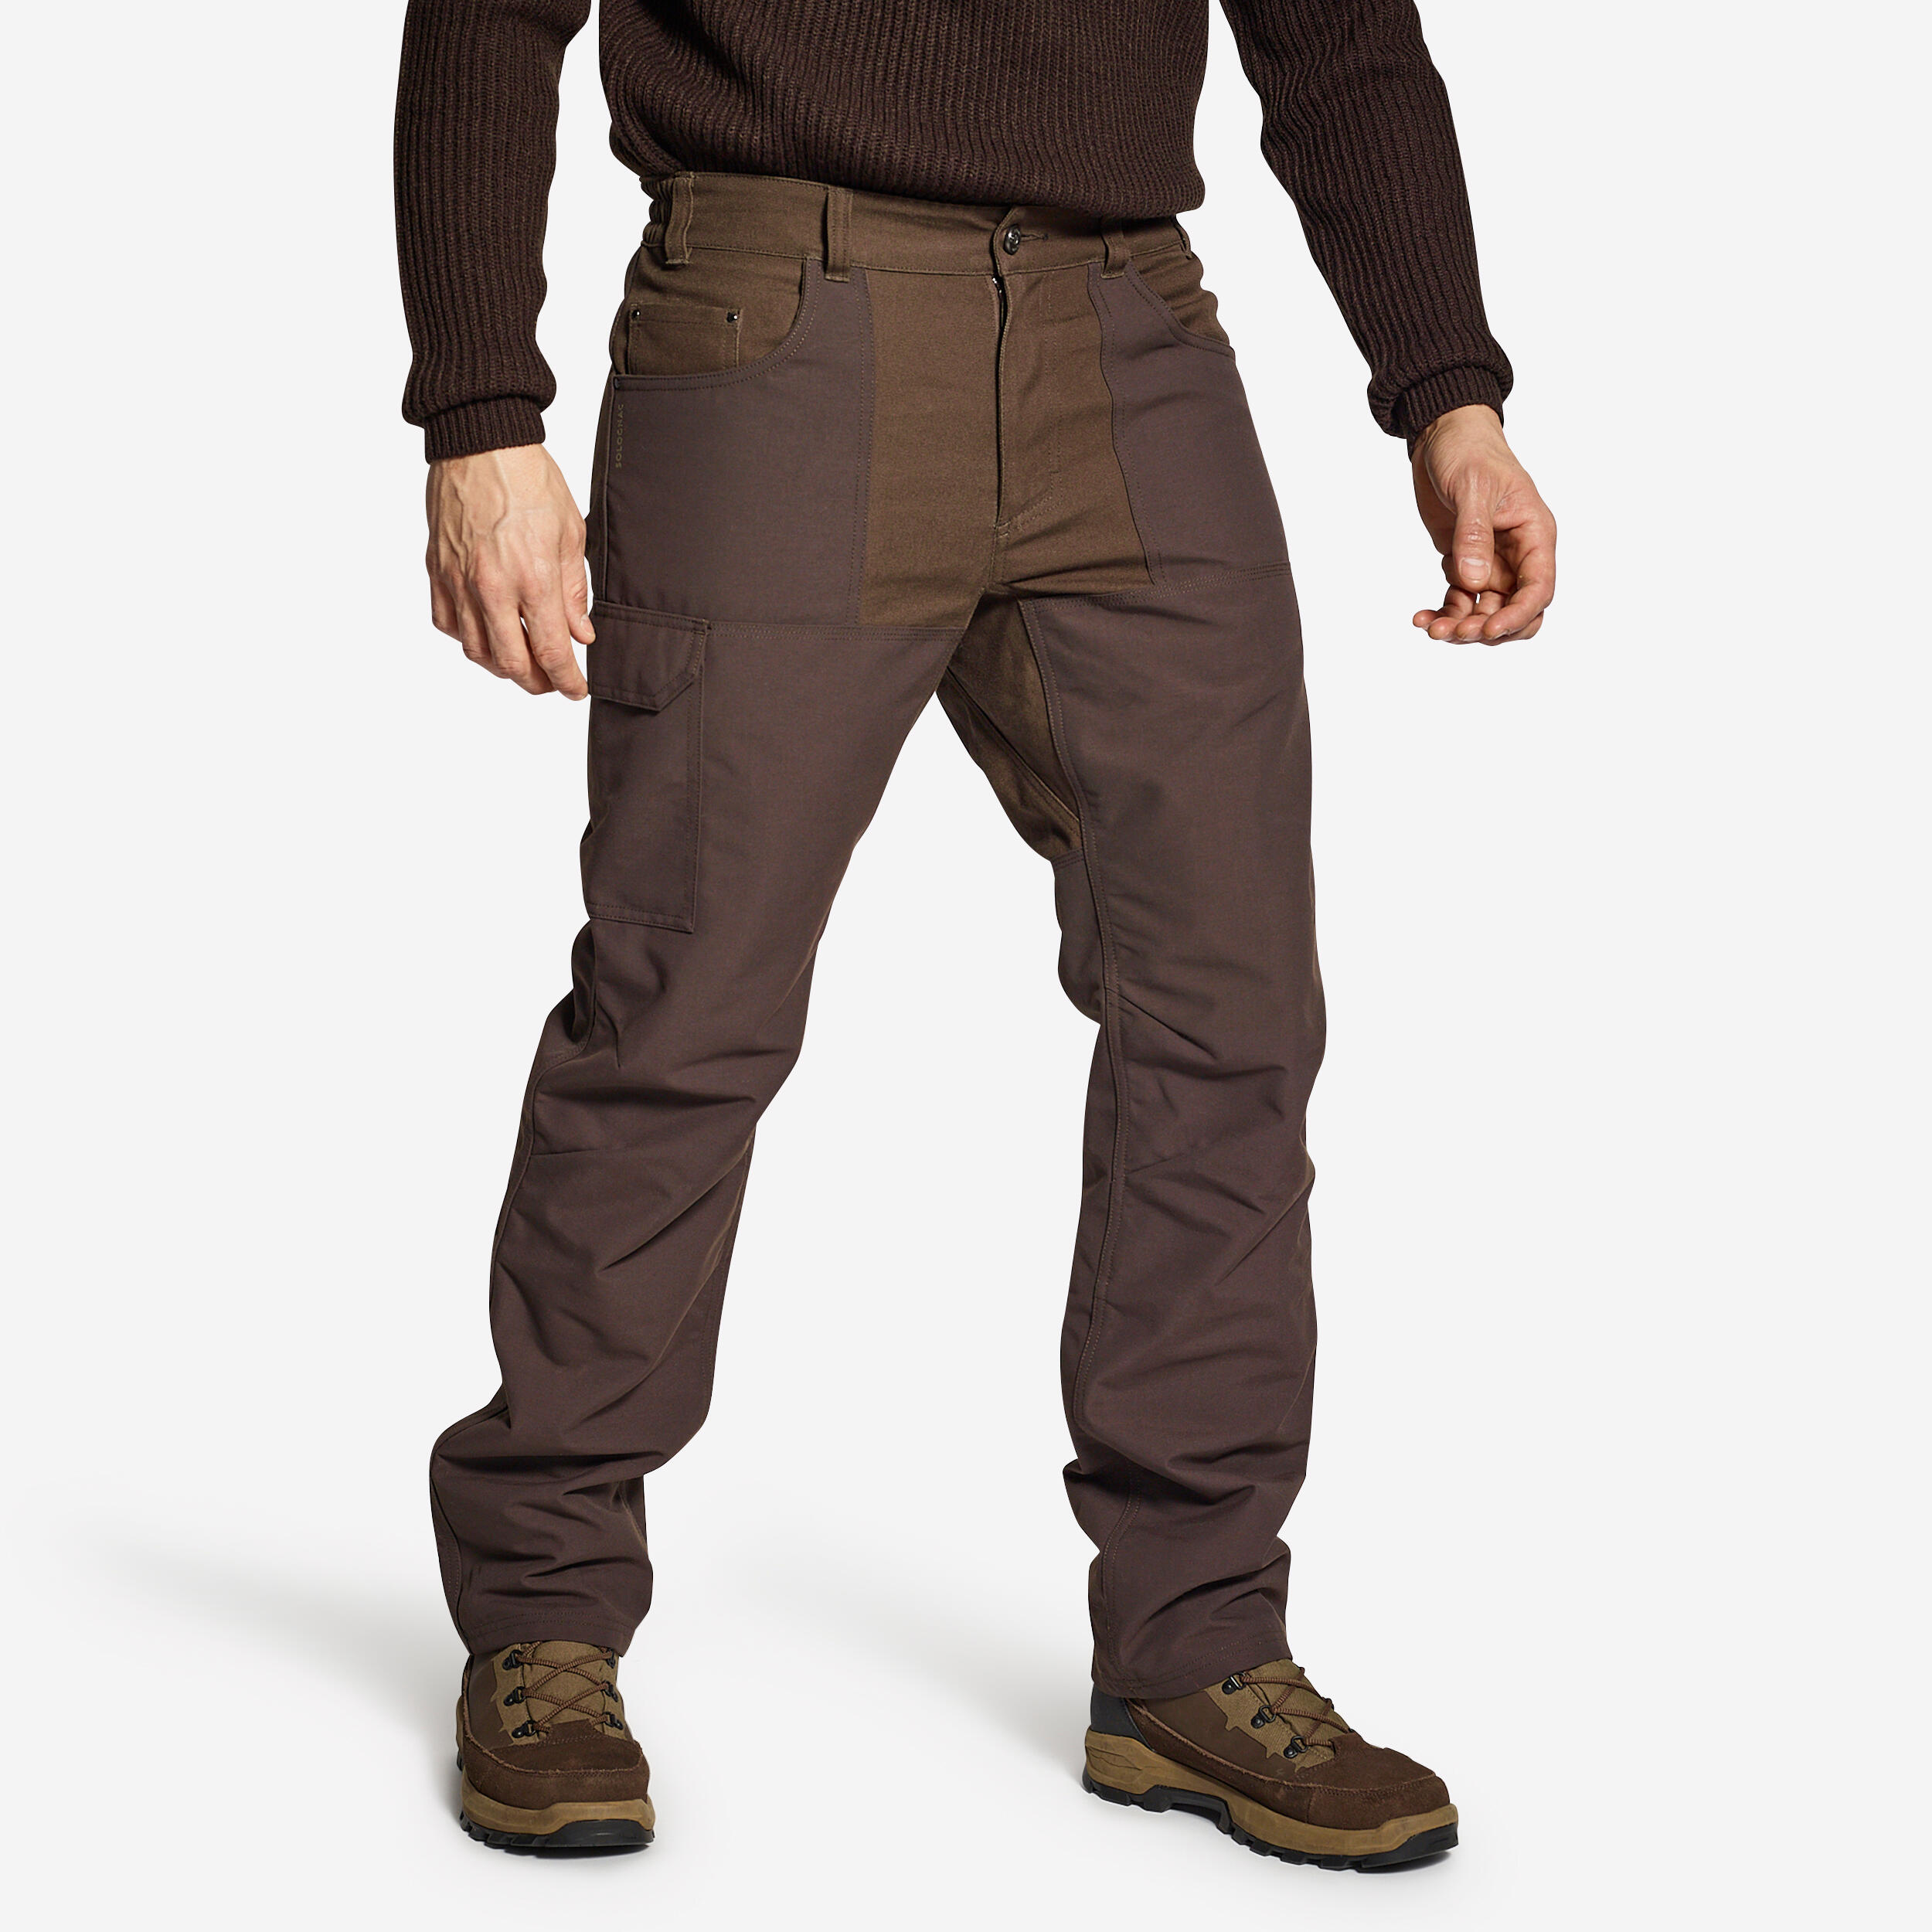 Buy Brown Lined Cargo Trousers (3-16yrs) from Next Canada